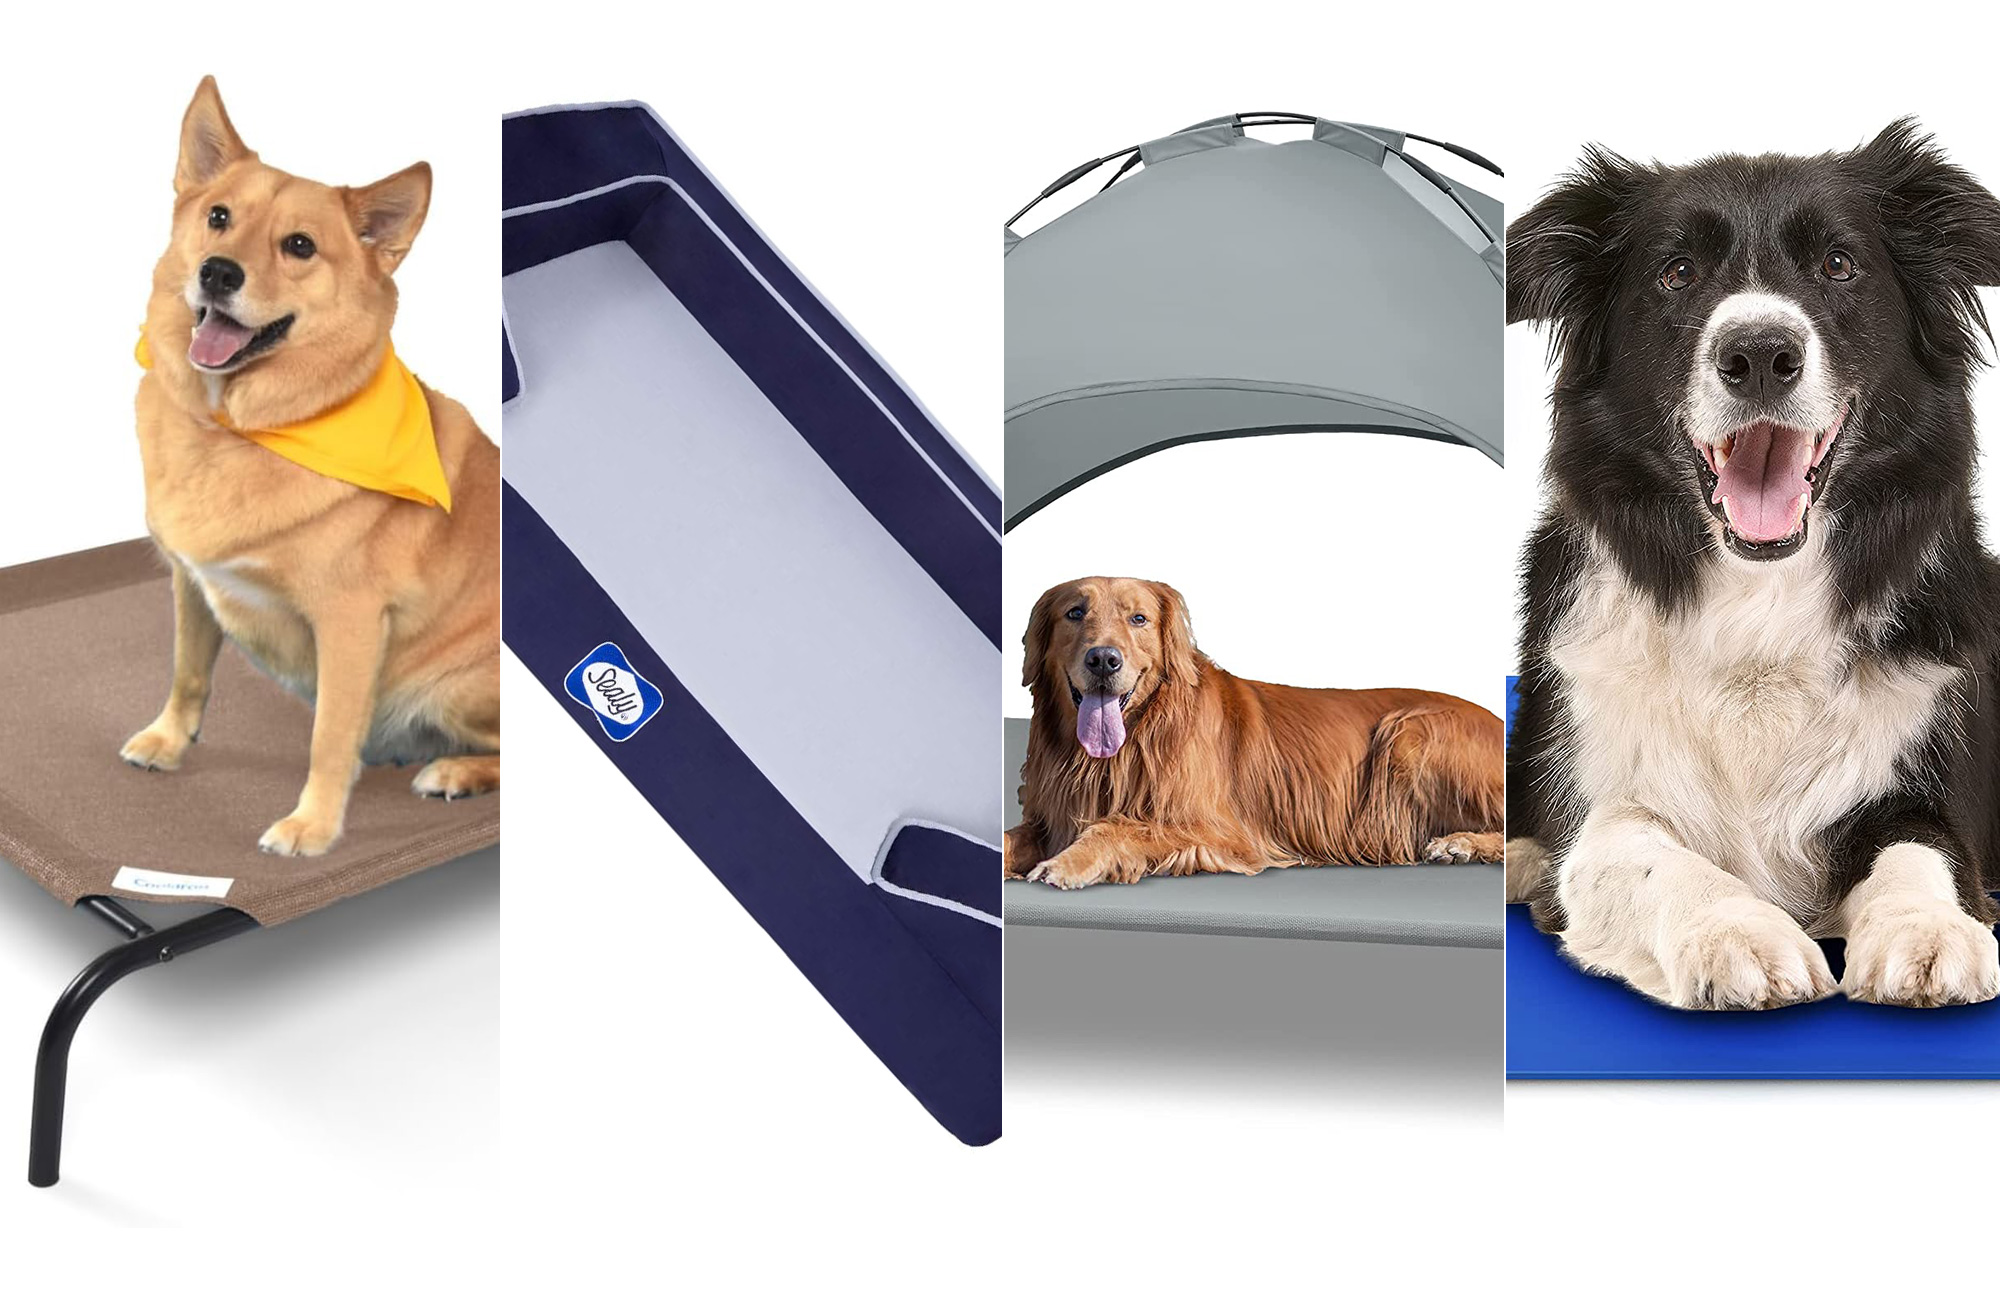 The best cooling dog beds composited